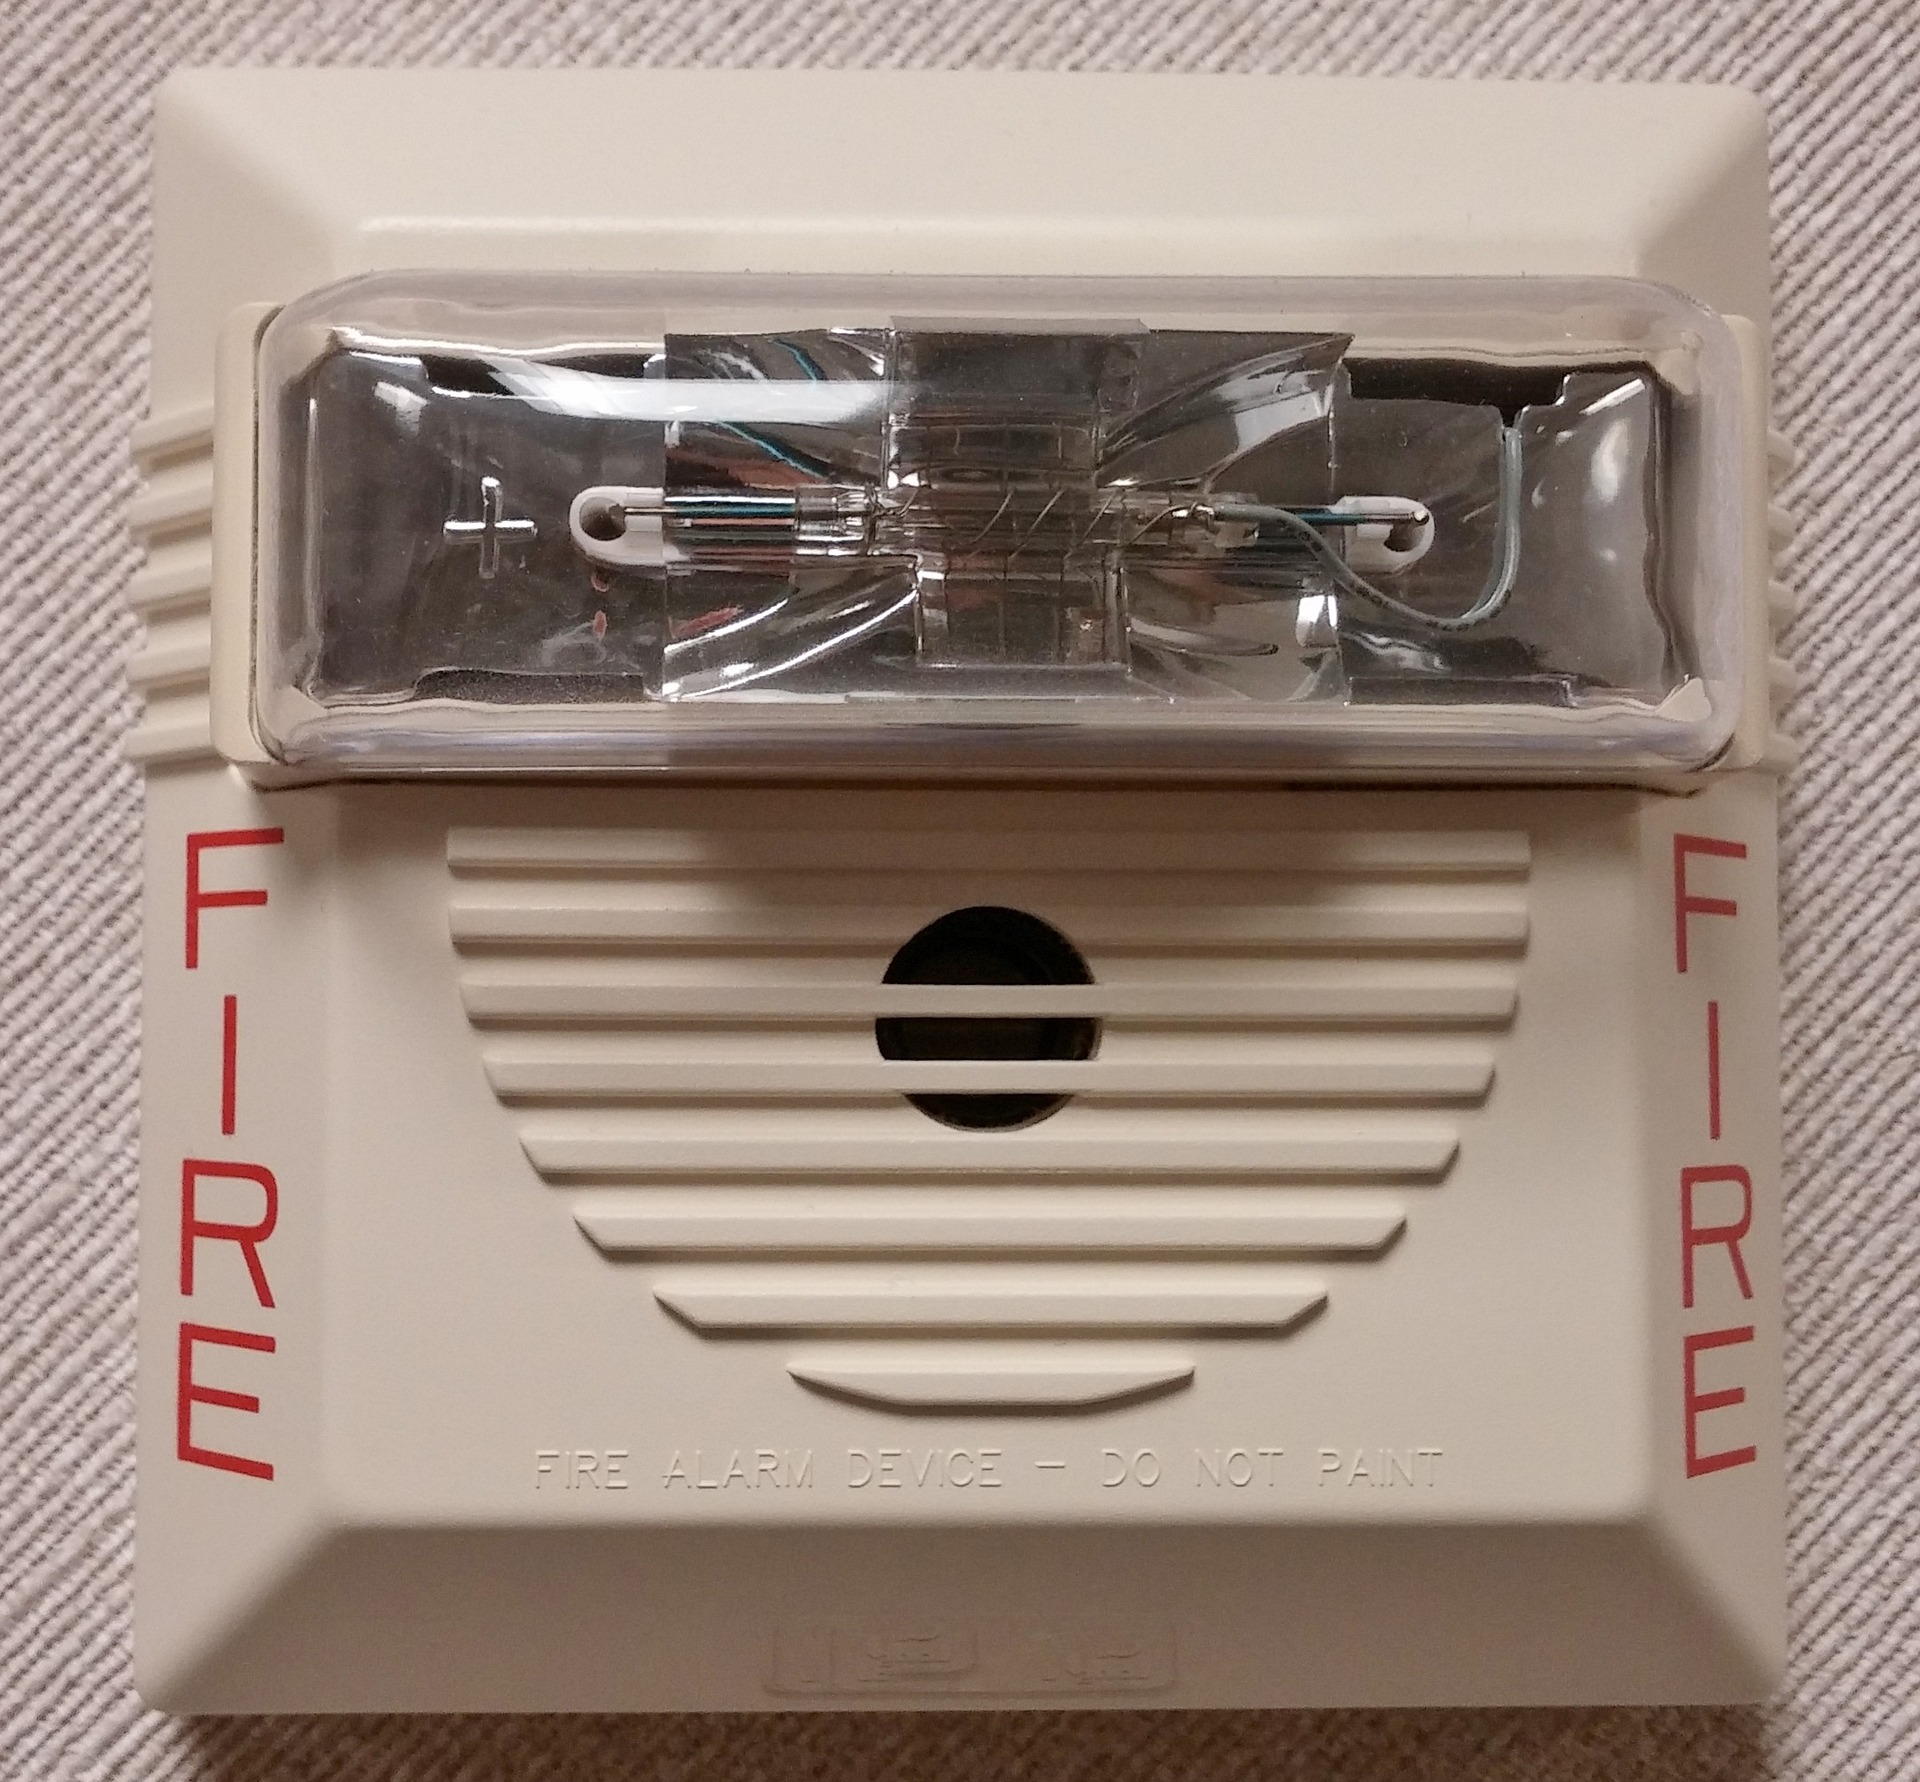 Everything you need to know about fire alarm inspections